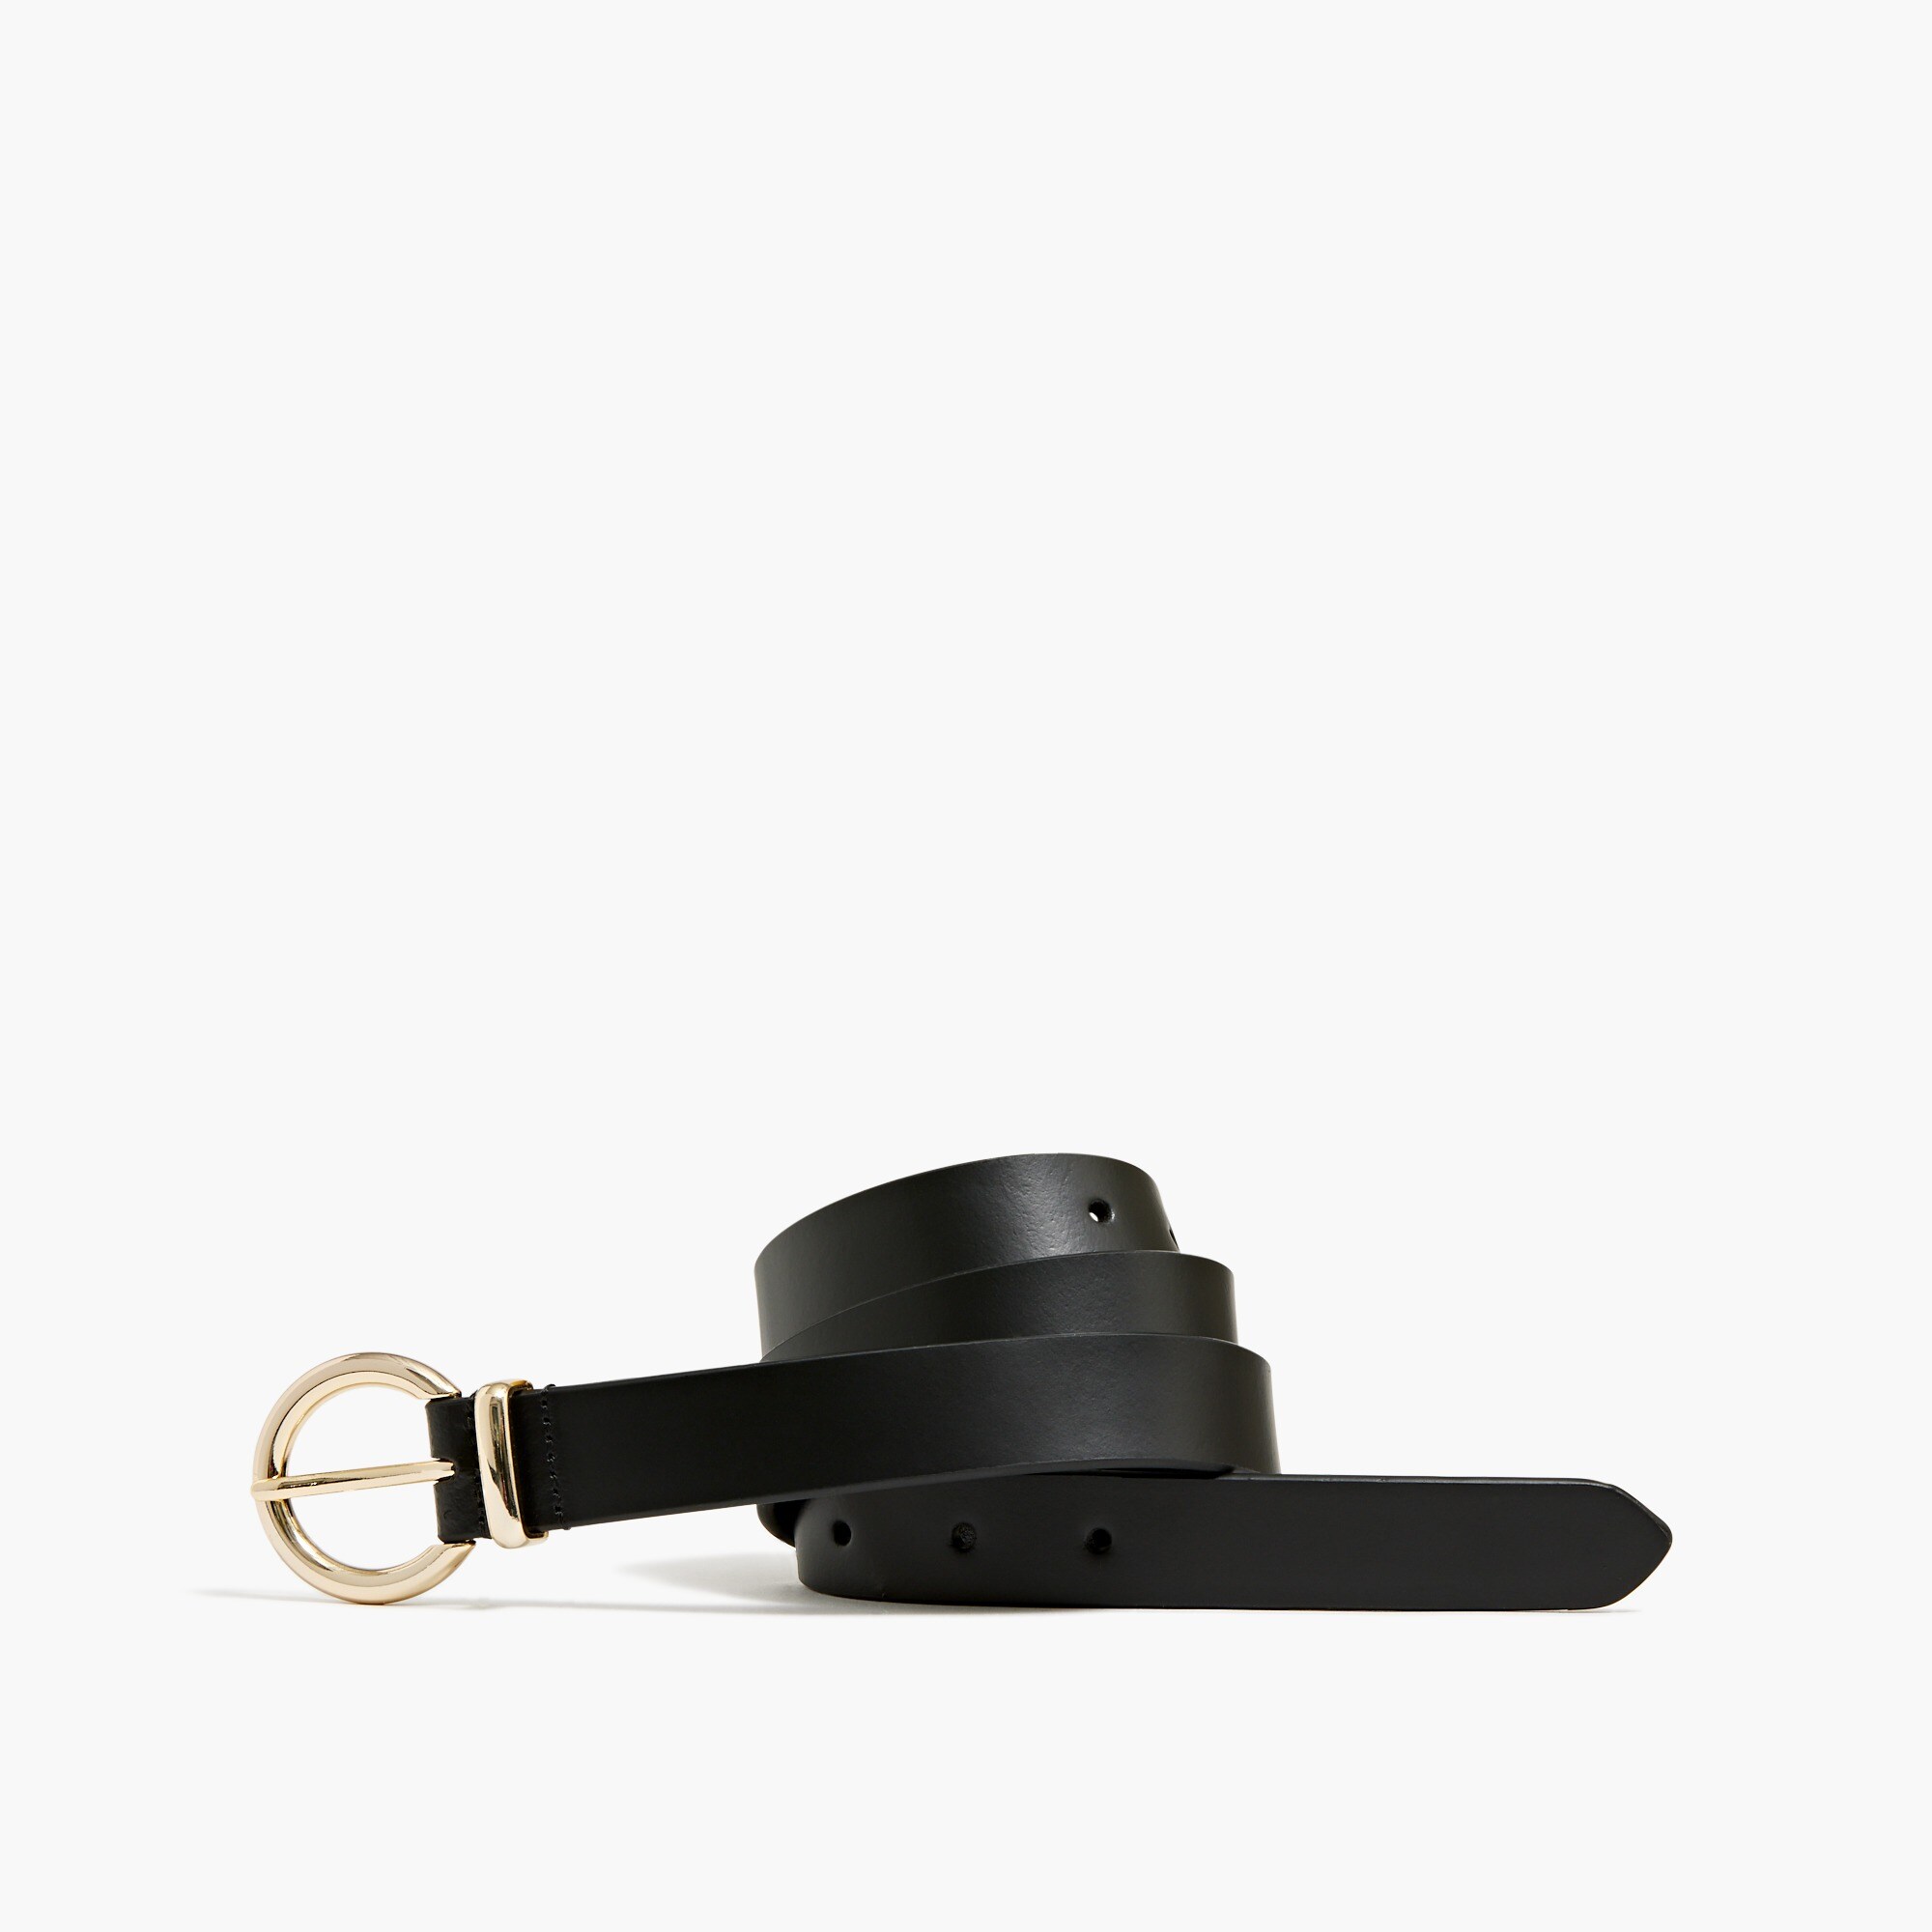  Leather belt with gold-tone buckle